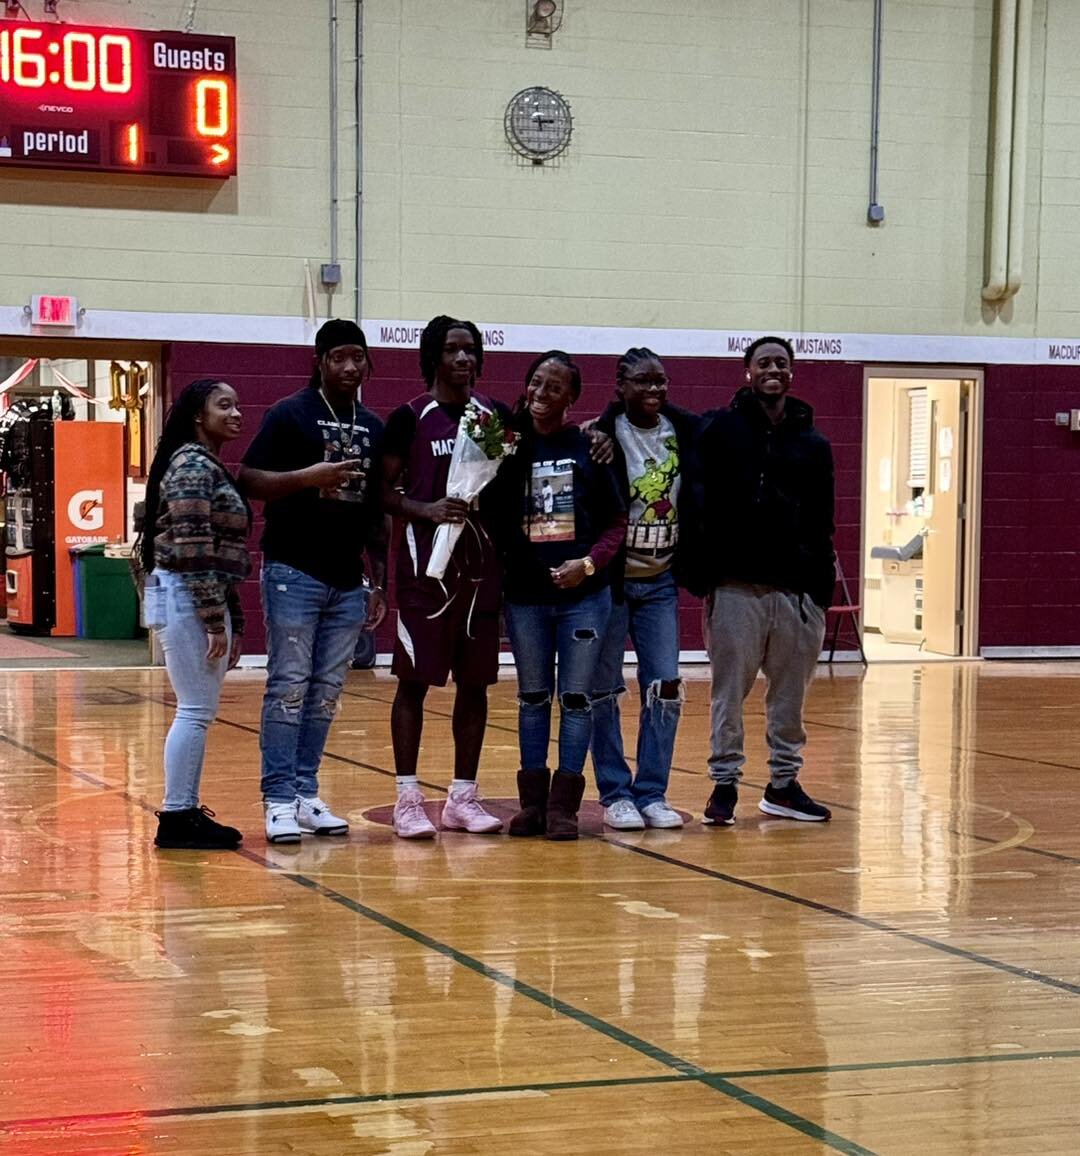 🏀🏀Varsity Boys Senior Night🏀🏀

Before the triumphant game against Dublin, we honored our two seniors, Marko and AZ. Congratulations, boys on a great season and thank you for your leadership and commitment to MacDuffie basketball. 

#themacduffies